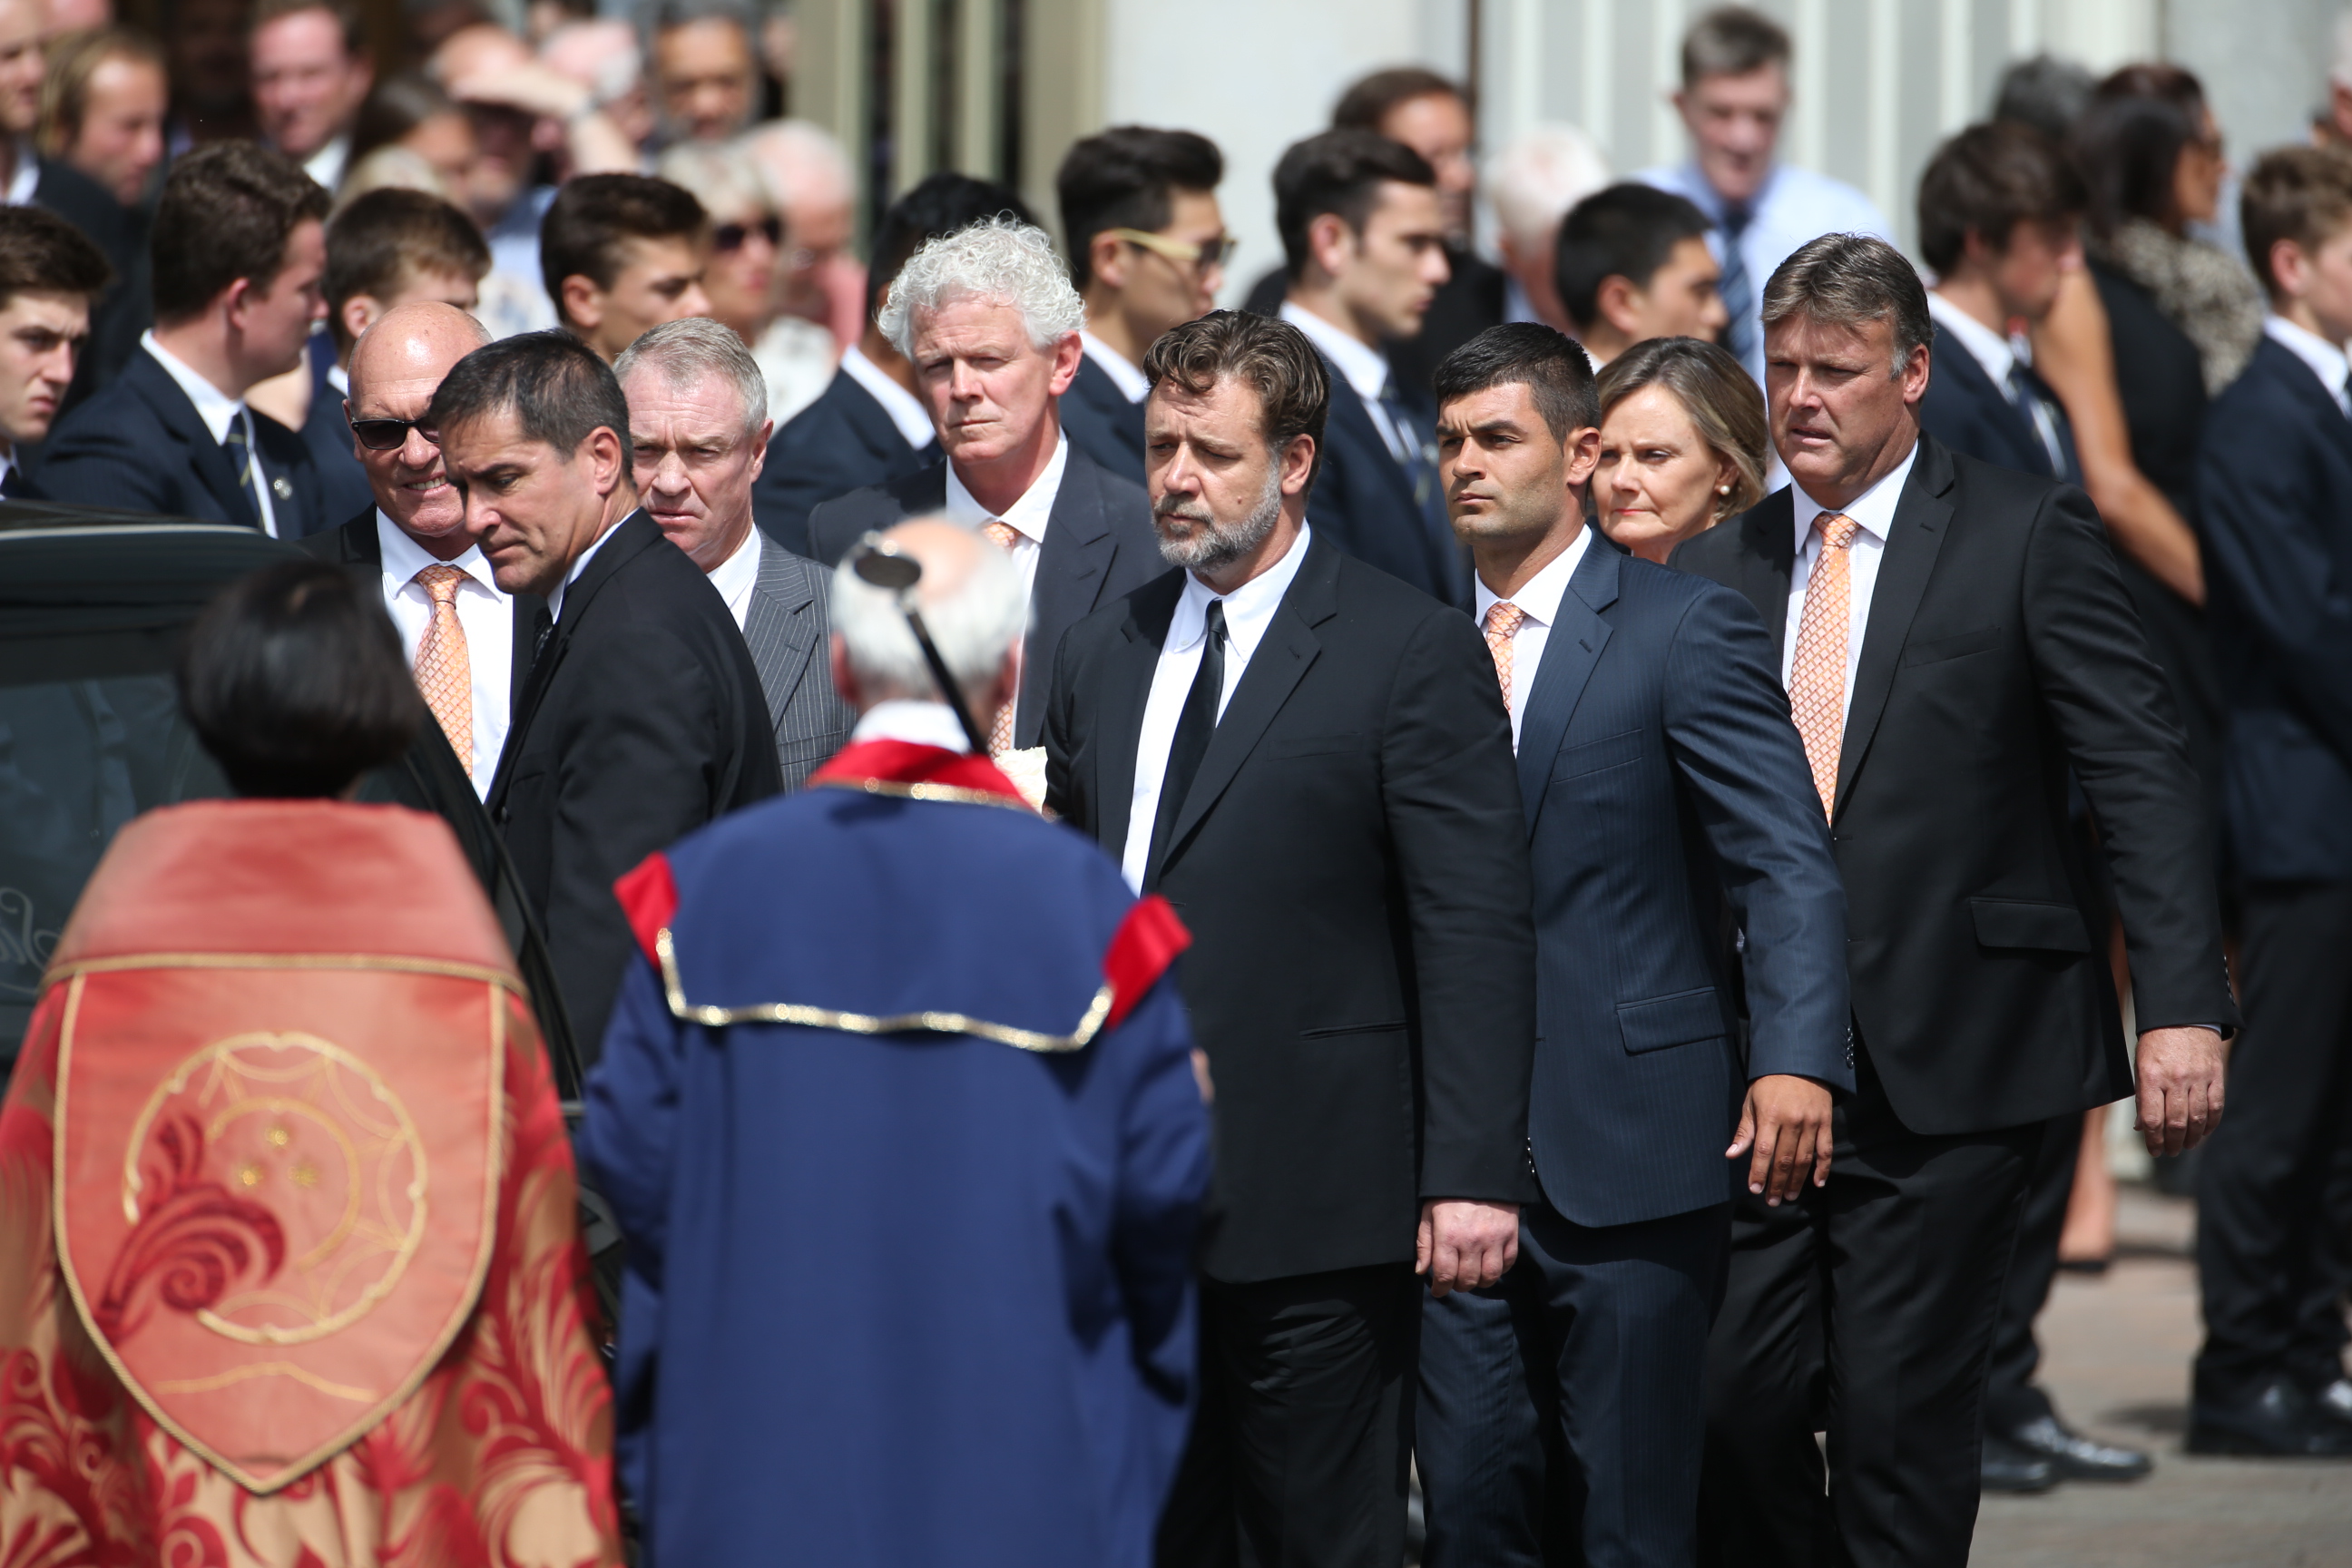 Russell Crowe was pallbearer at cousin Martin Crowe's funeral